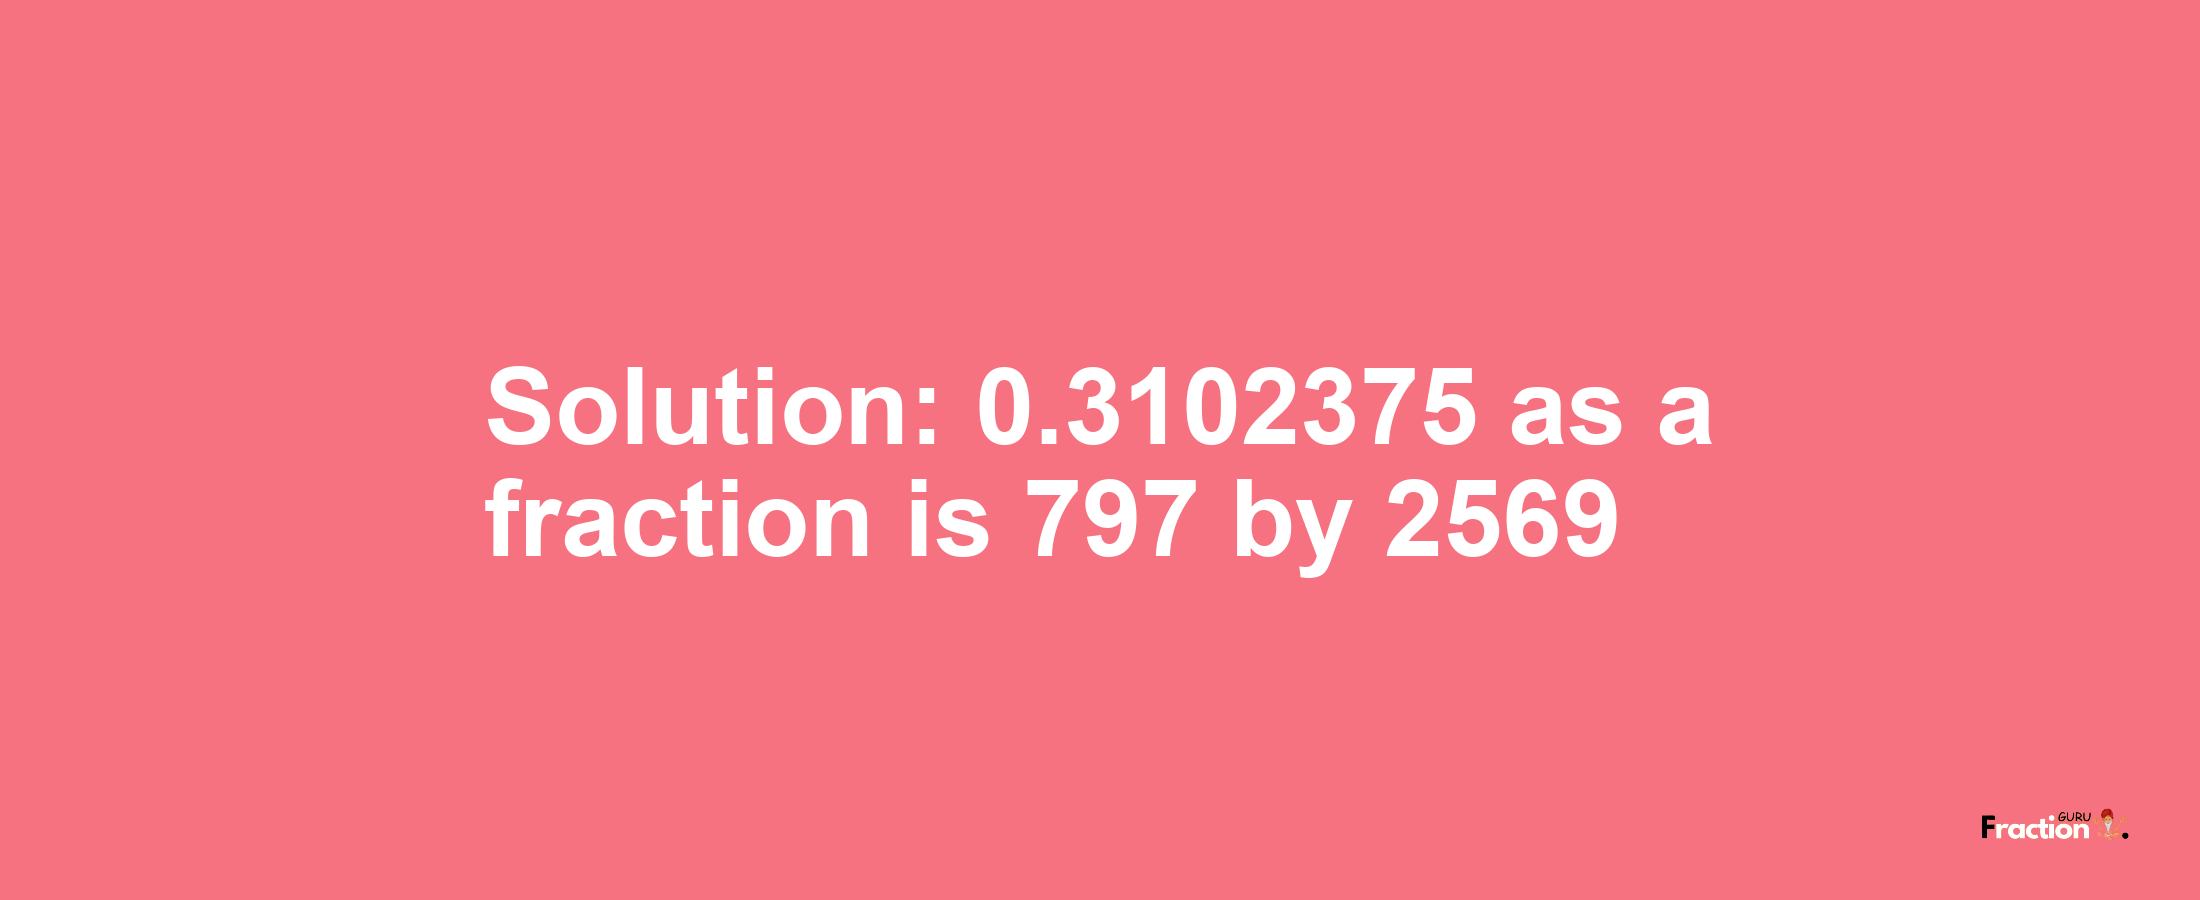 Solution:0.3102375 as a fraction is 797/2569